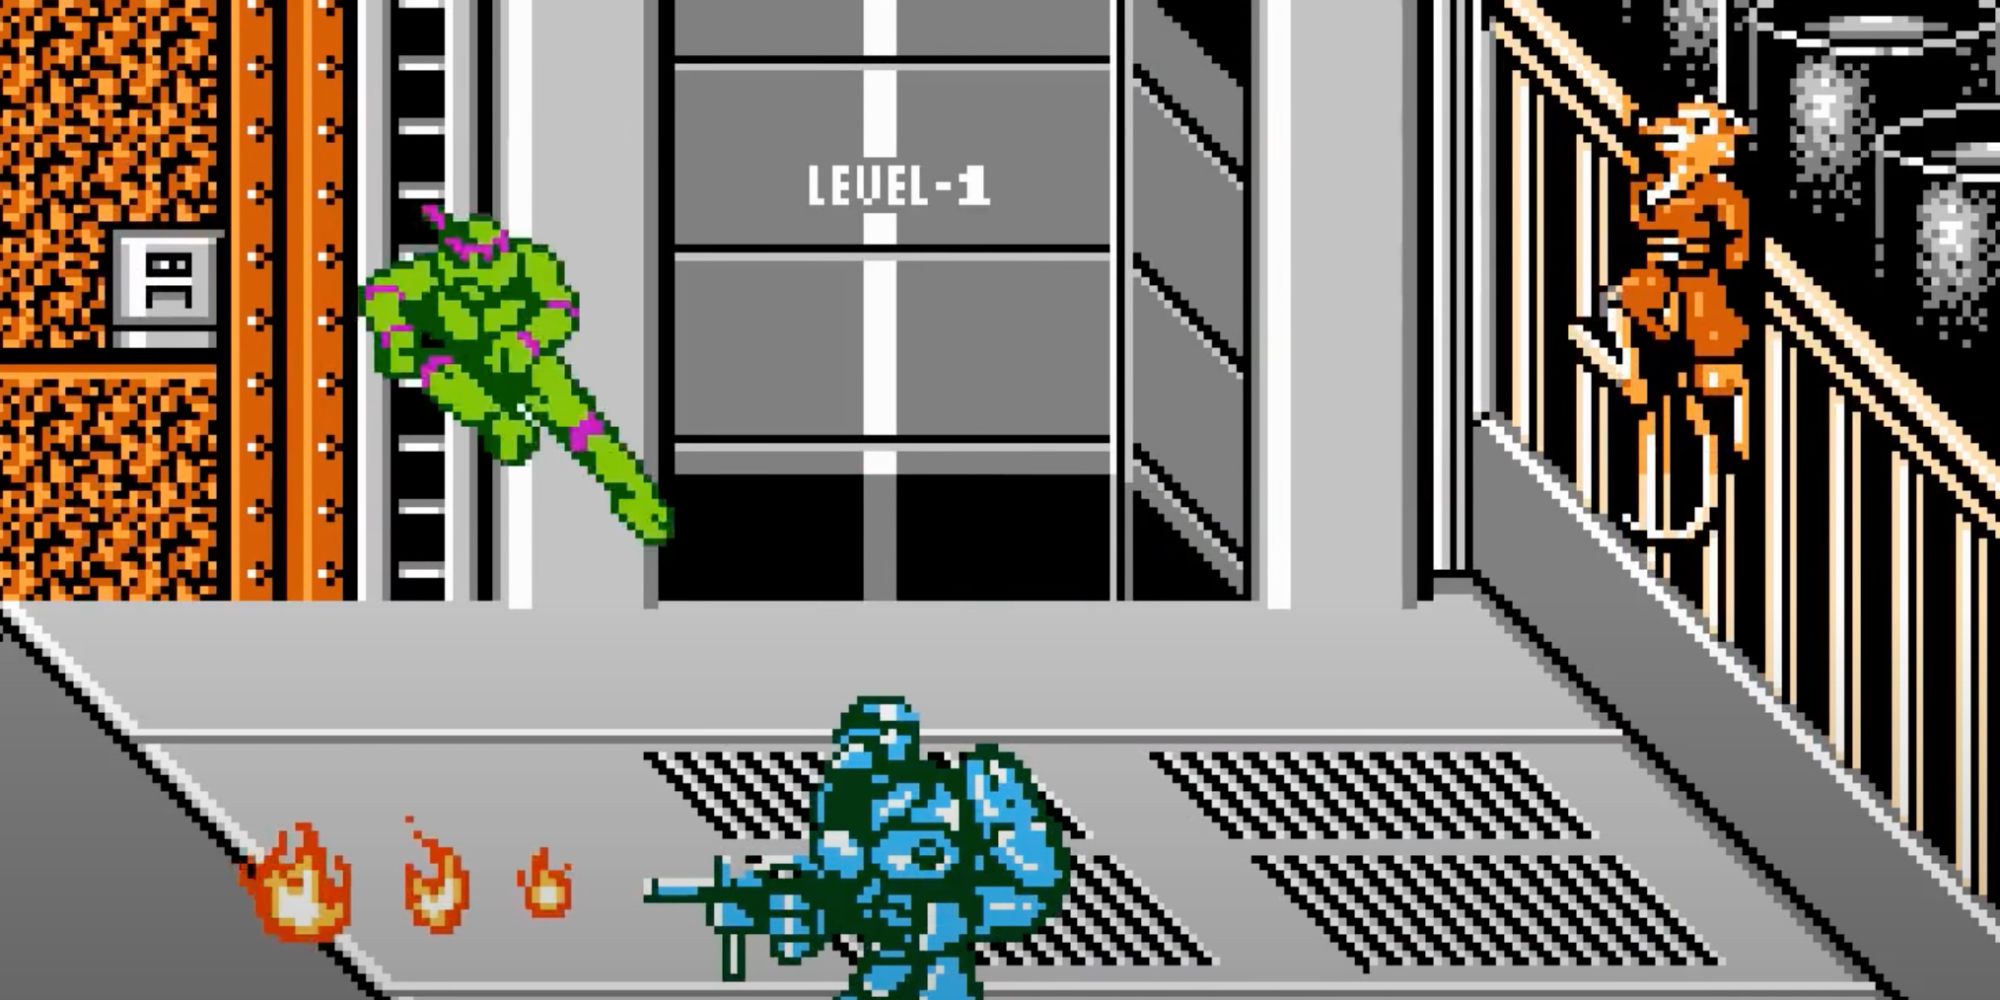 The NES port of the original arcade game will be in The Cowabunga Collection